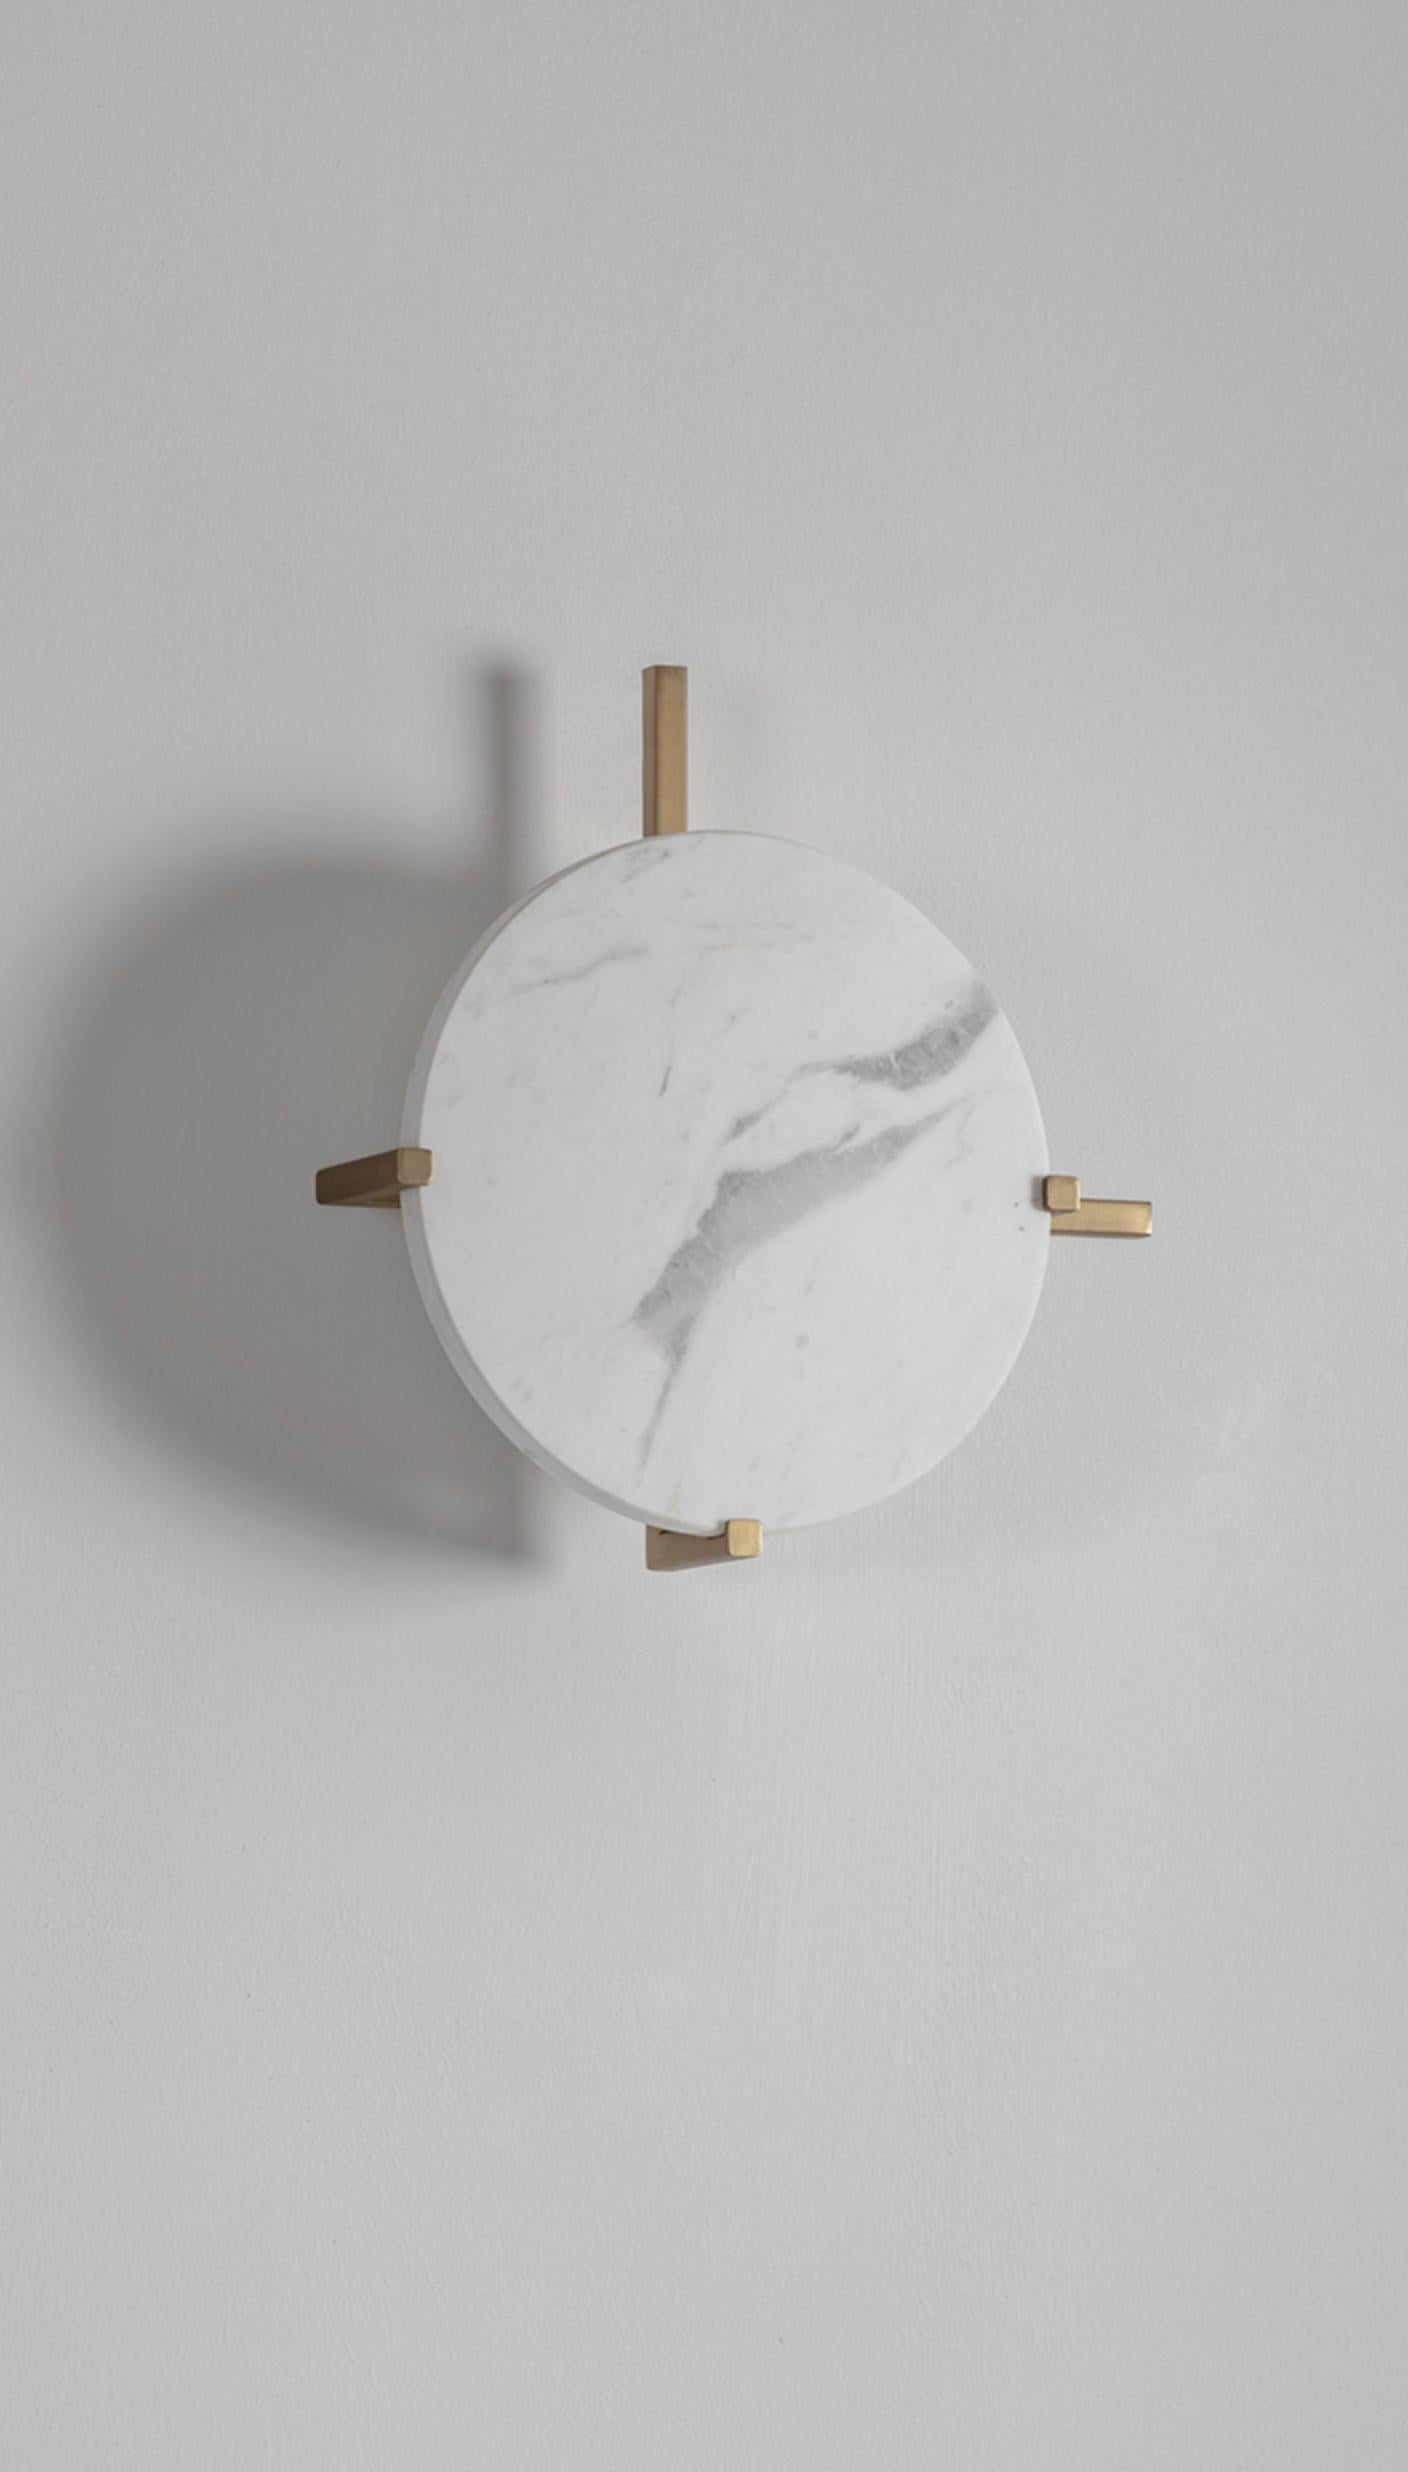 Set of 2 Marble Disc Wall Lights by Square in Circle
Dimensions: W 30 x H 30 x D 4 cm
Materials: Brushed brass finish, white marble

This disc-shaped wall light comes with a metal bracket attached behind. The two arms of the bracket project beyond